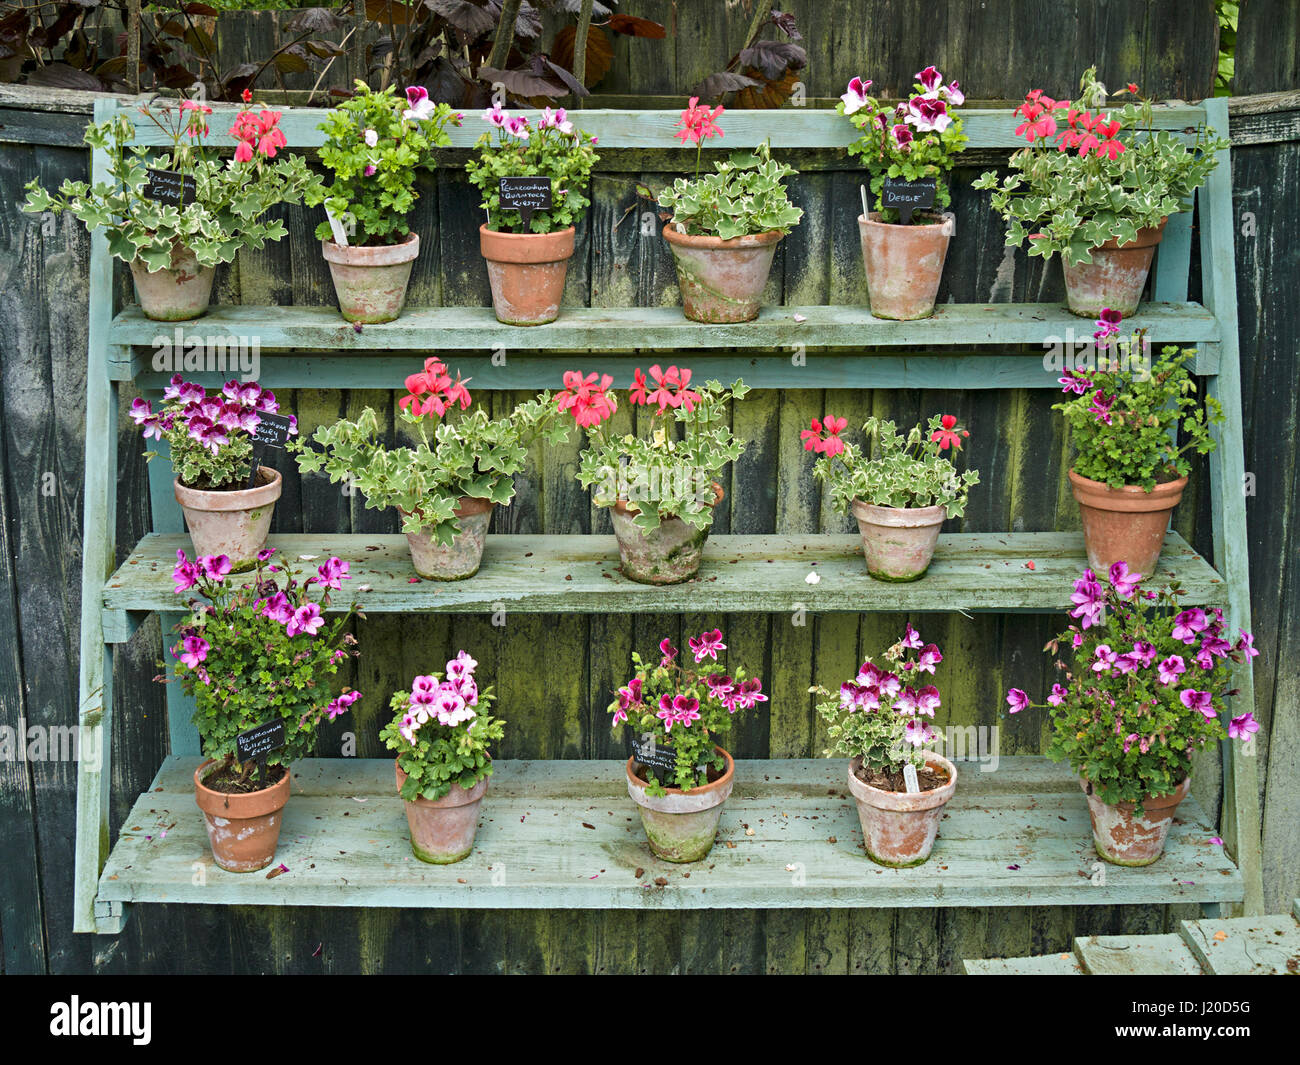 Ornamental plant display shelving stand with pelargoniums hanging on wooden fence, auricula theatre, Barnsdale Gardens, Oakham, Rutland, England, UK Stock Photo